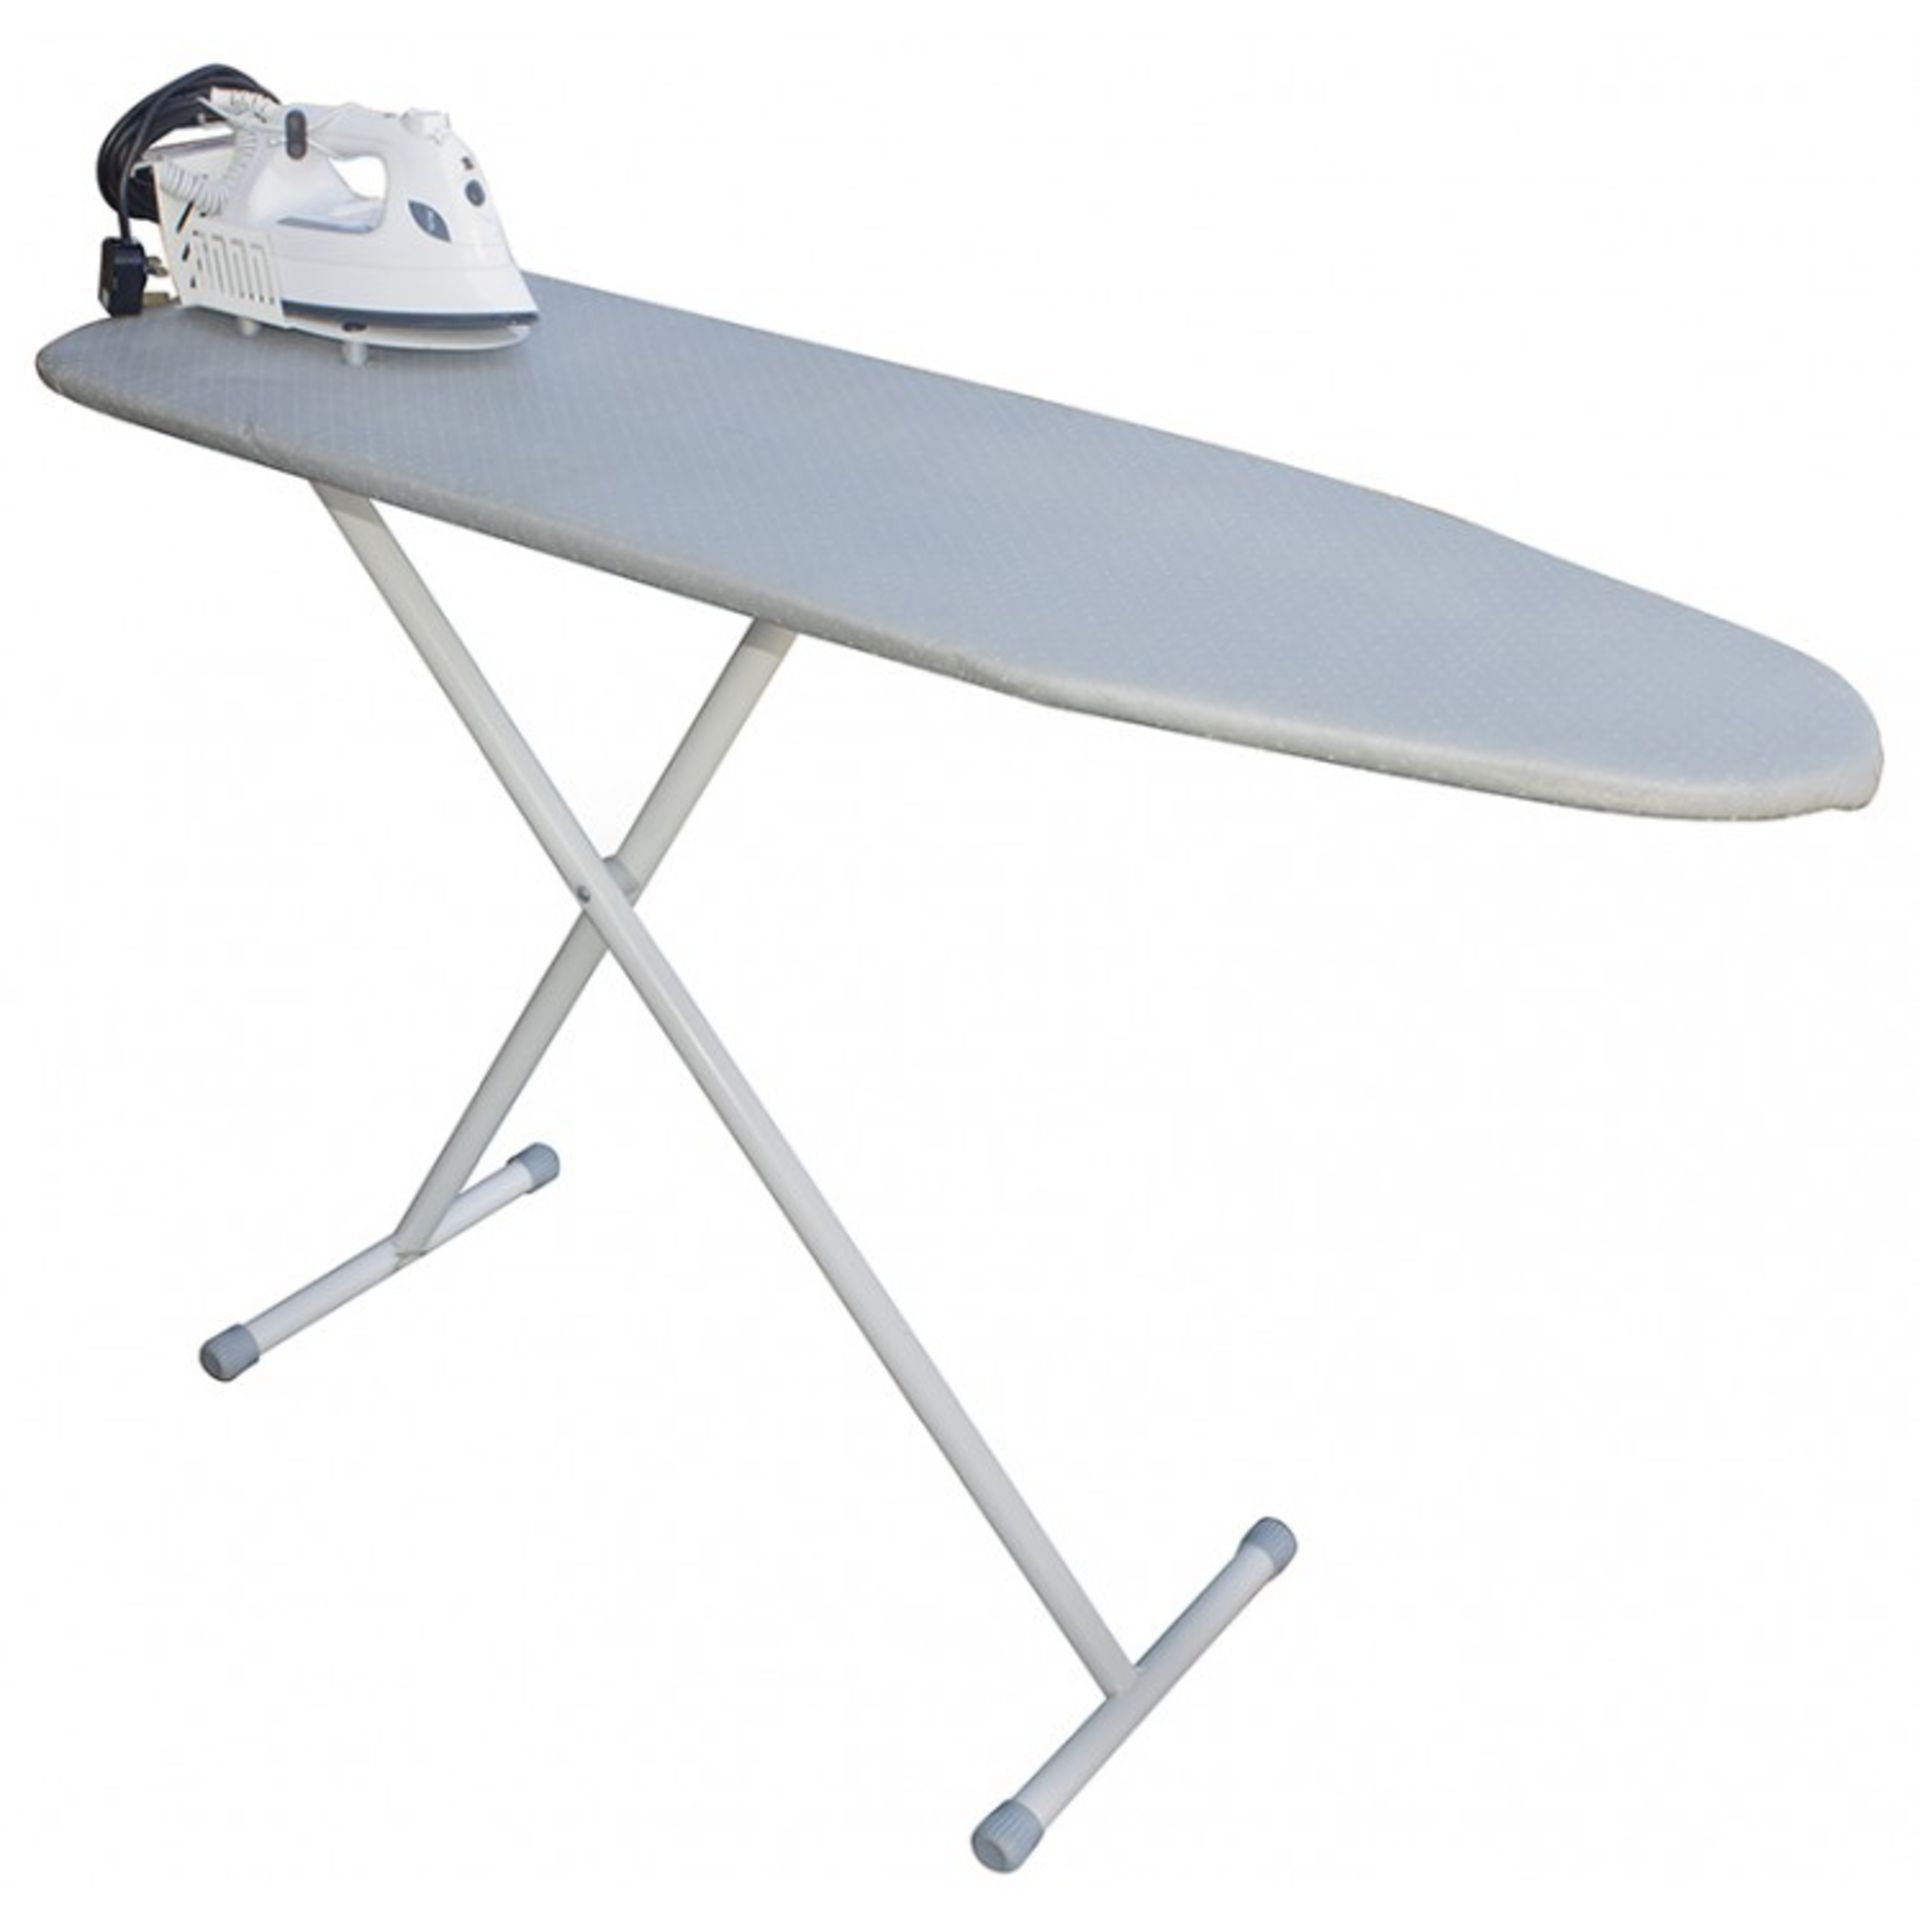 100 x  Iron Board With Iron

Ex Hotel Iron with ironing board, Prevents Iron Burn Damage and Iron